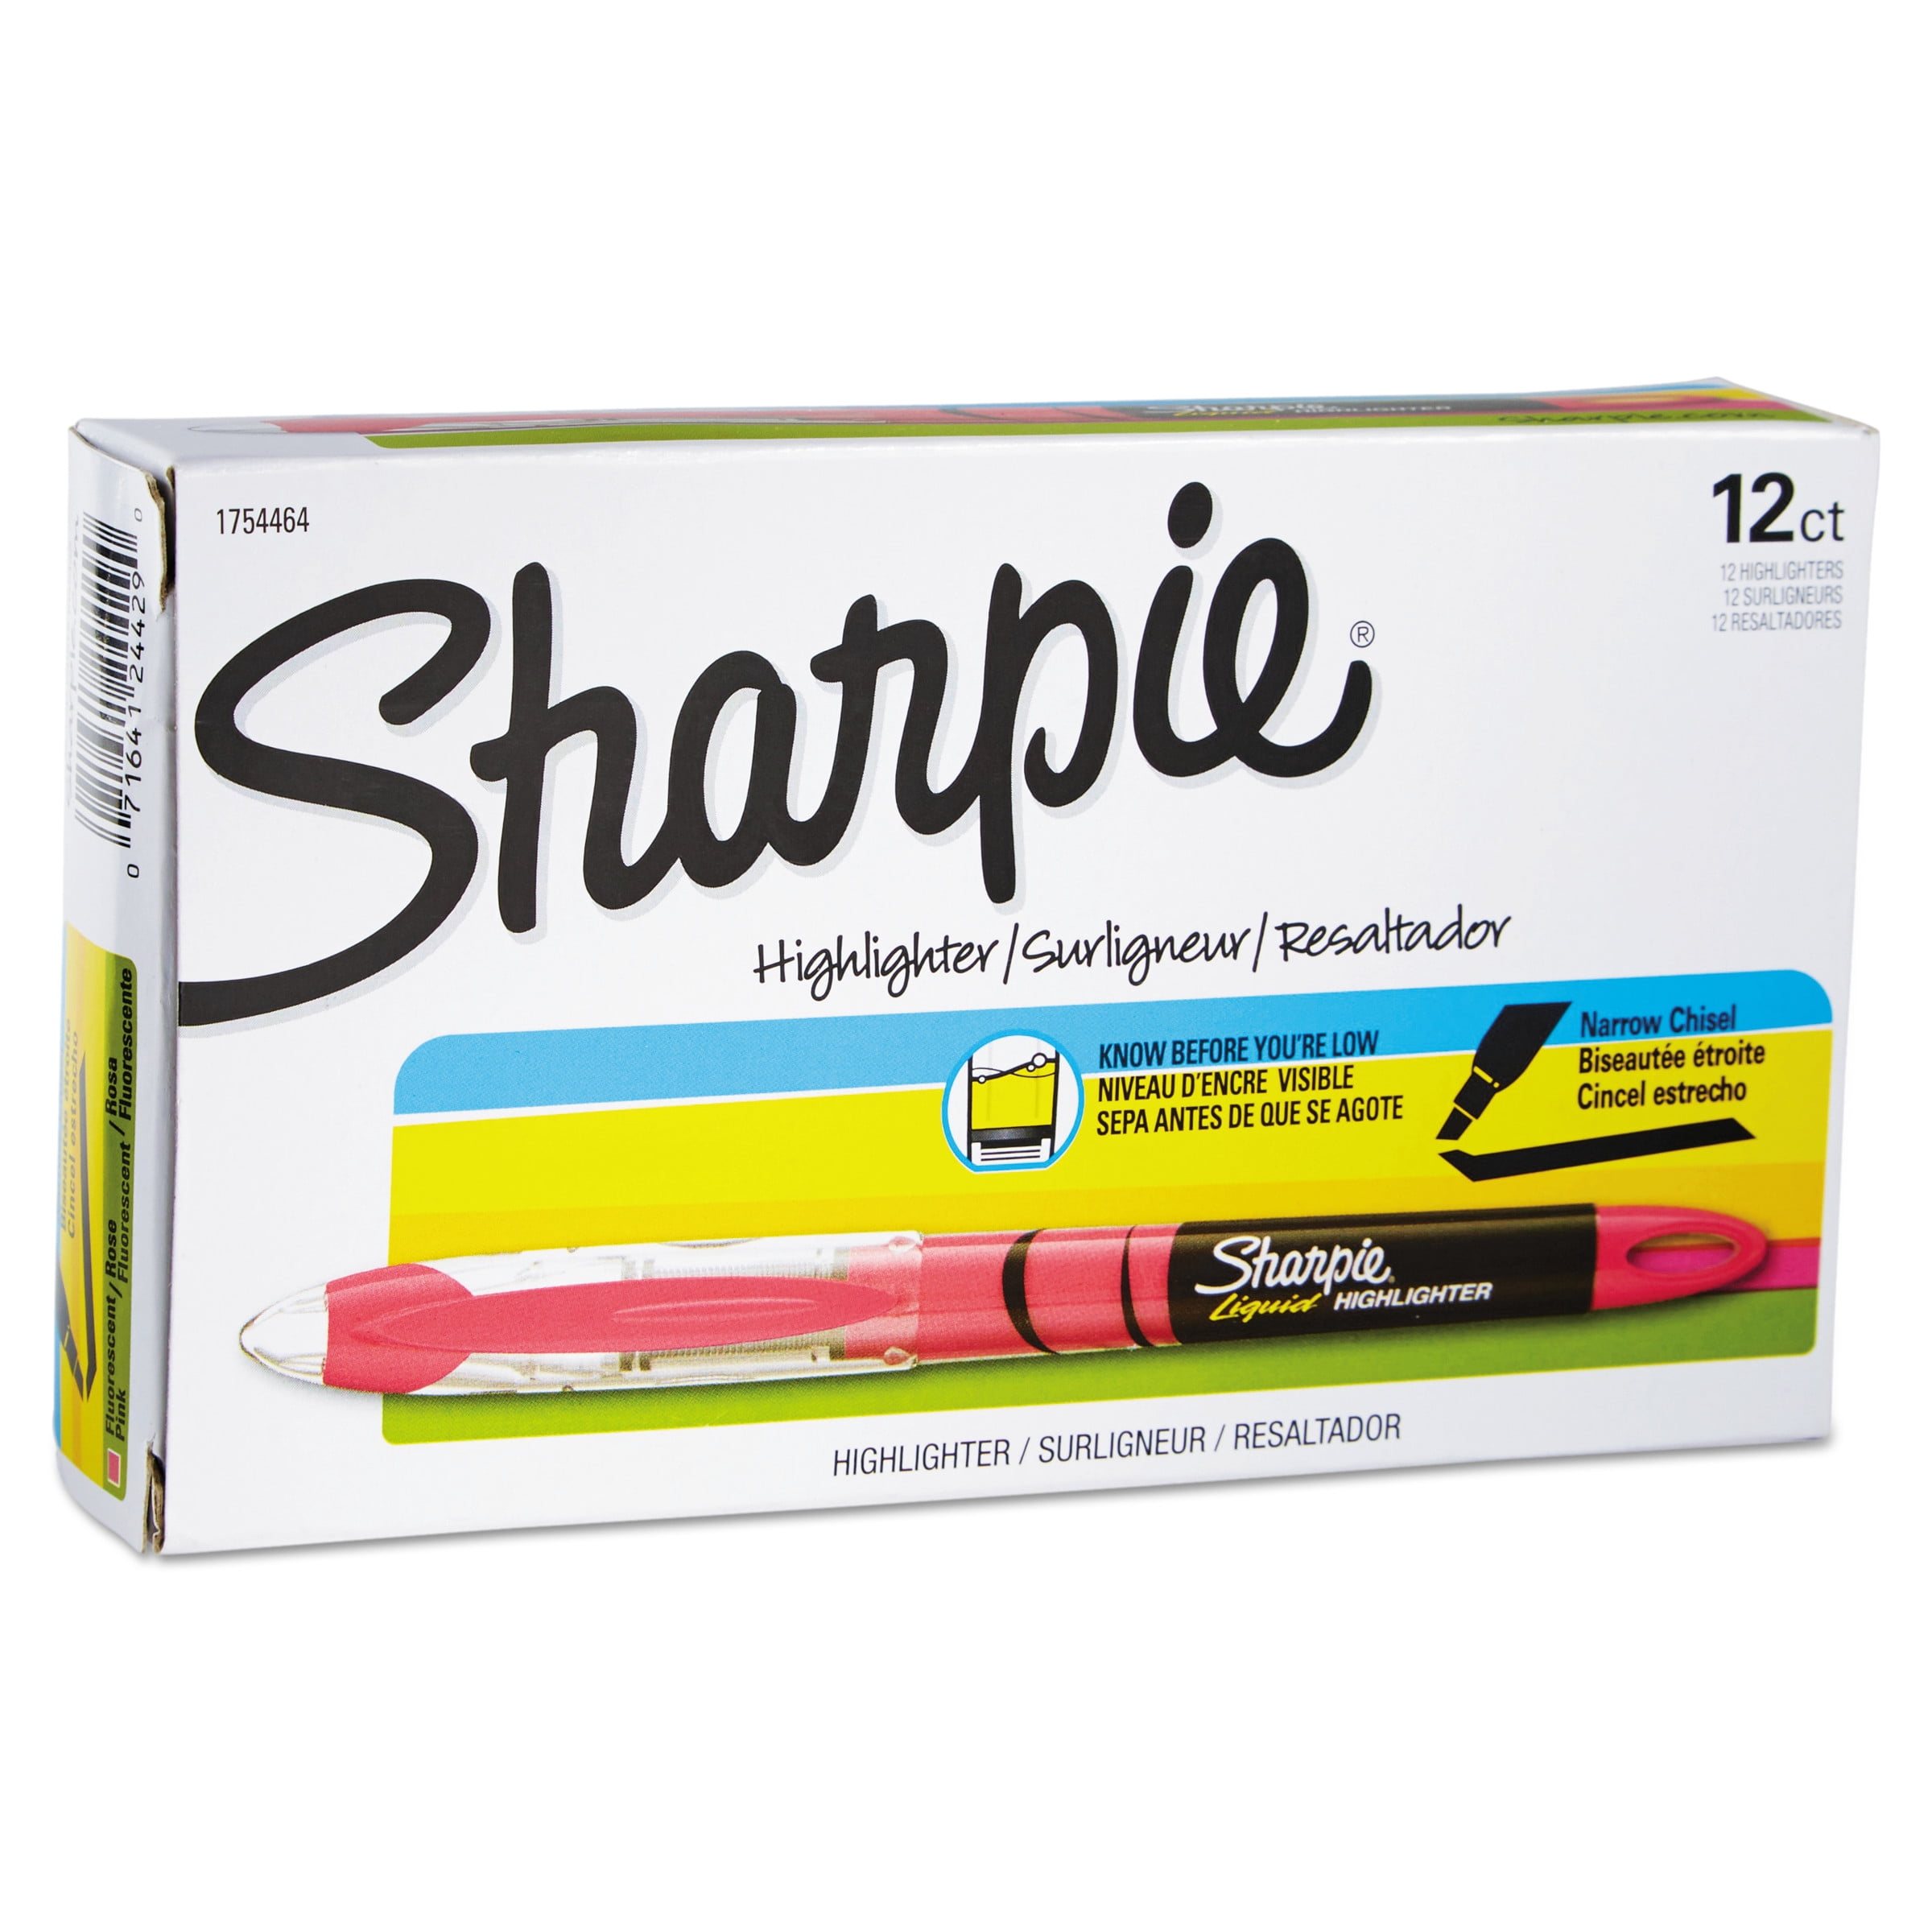 Sharpie Accent Liquid Pen Style Highlighter, Chisel Tip, Pink, 12 Count 